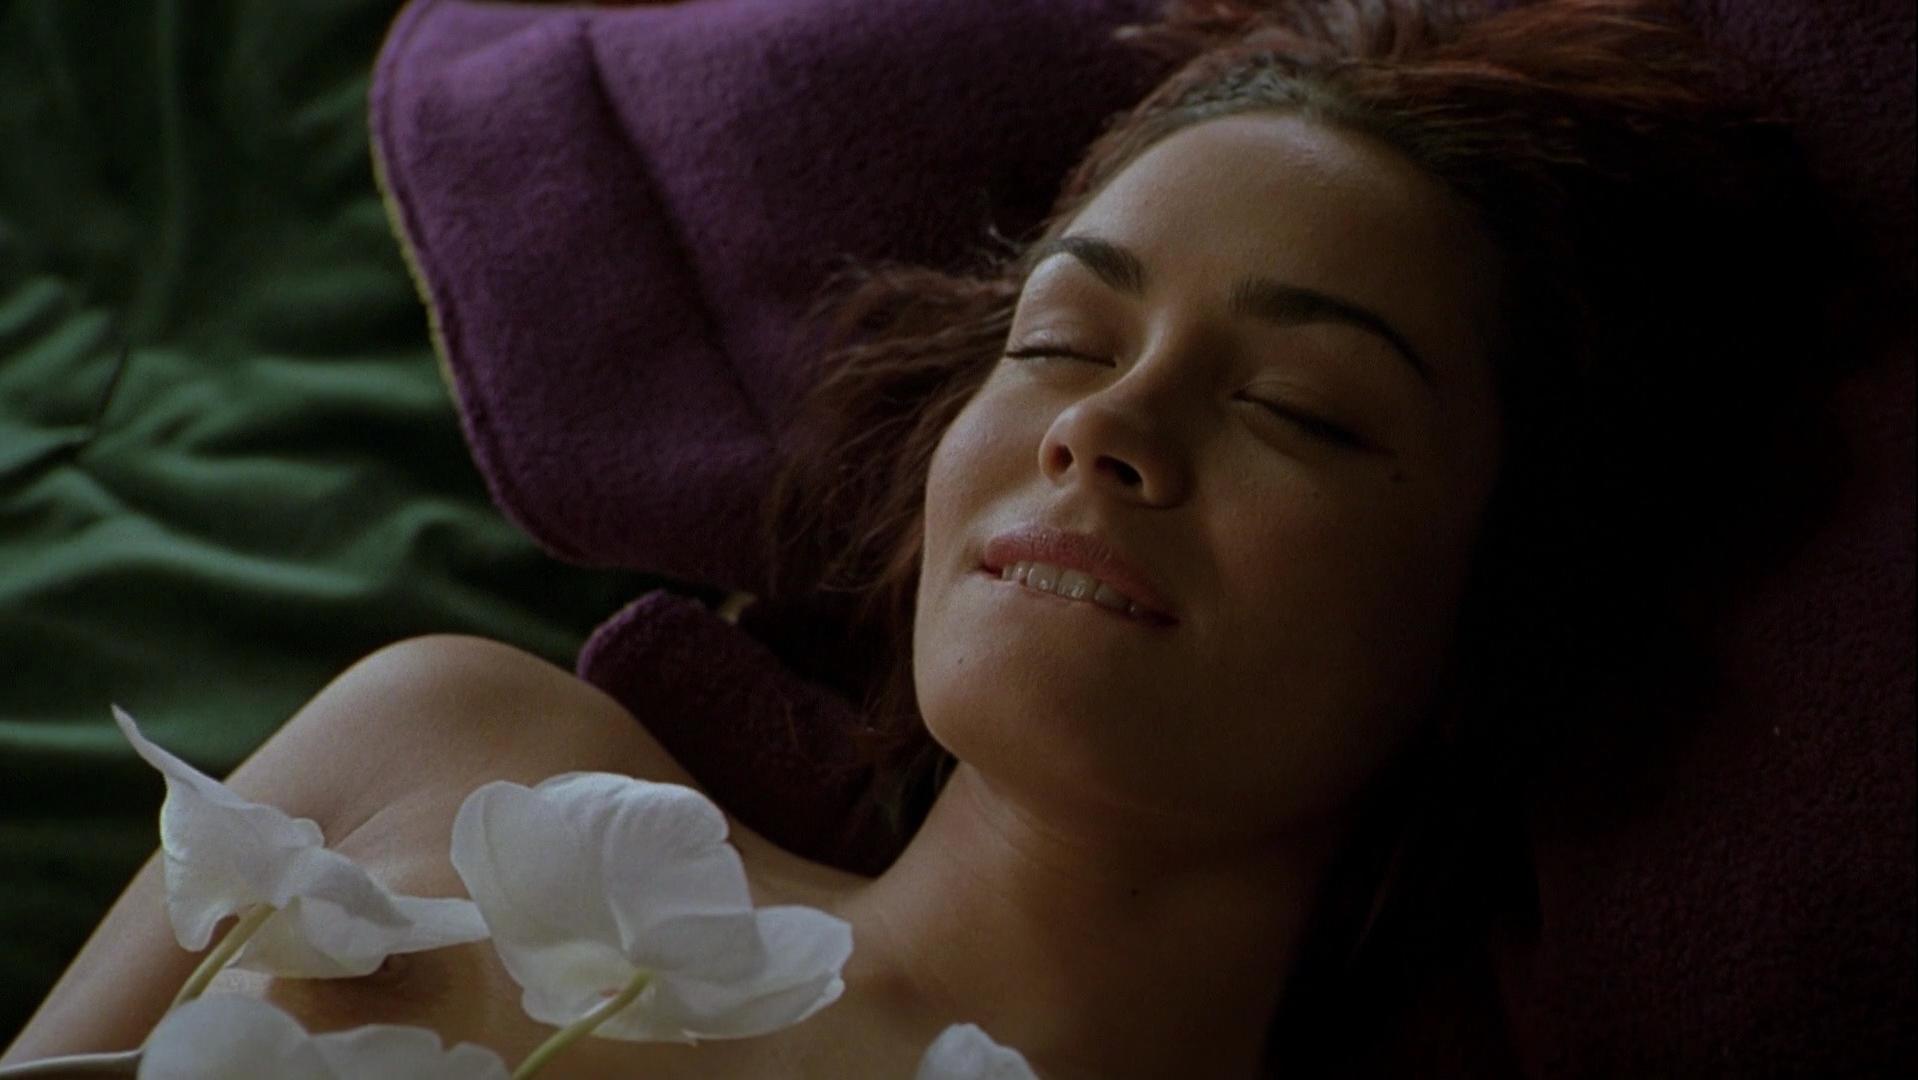 Nude video celebs » Shannyn Sossamon nude - 40 Days and 40 Nights (2002)